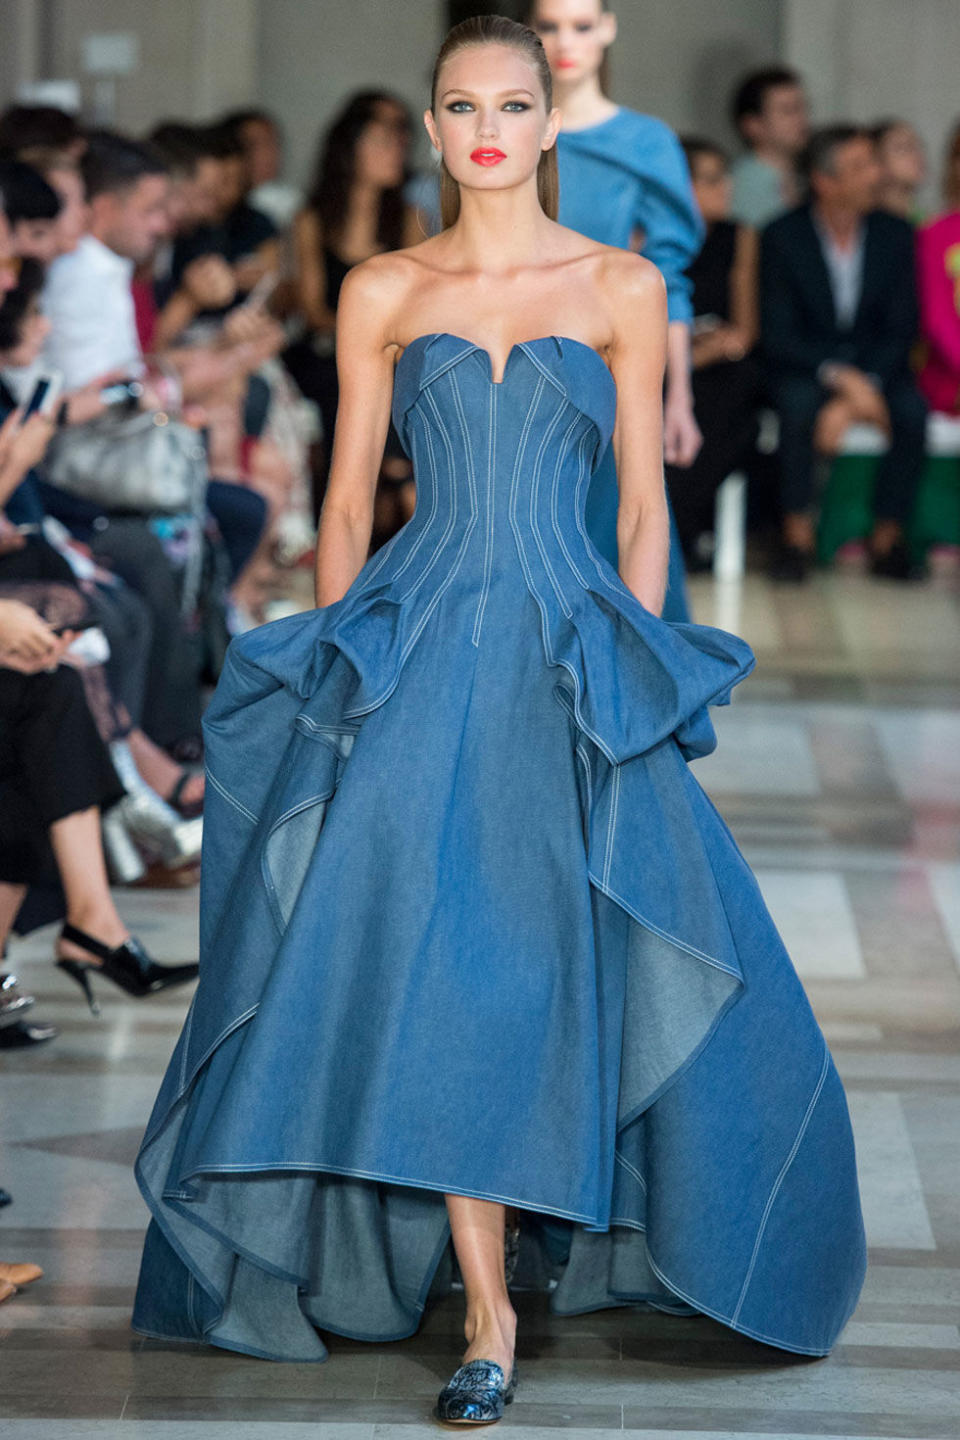 Gowns From NYFW That Might Make an Appearance on the Emmys Red Carpet